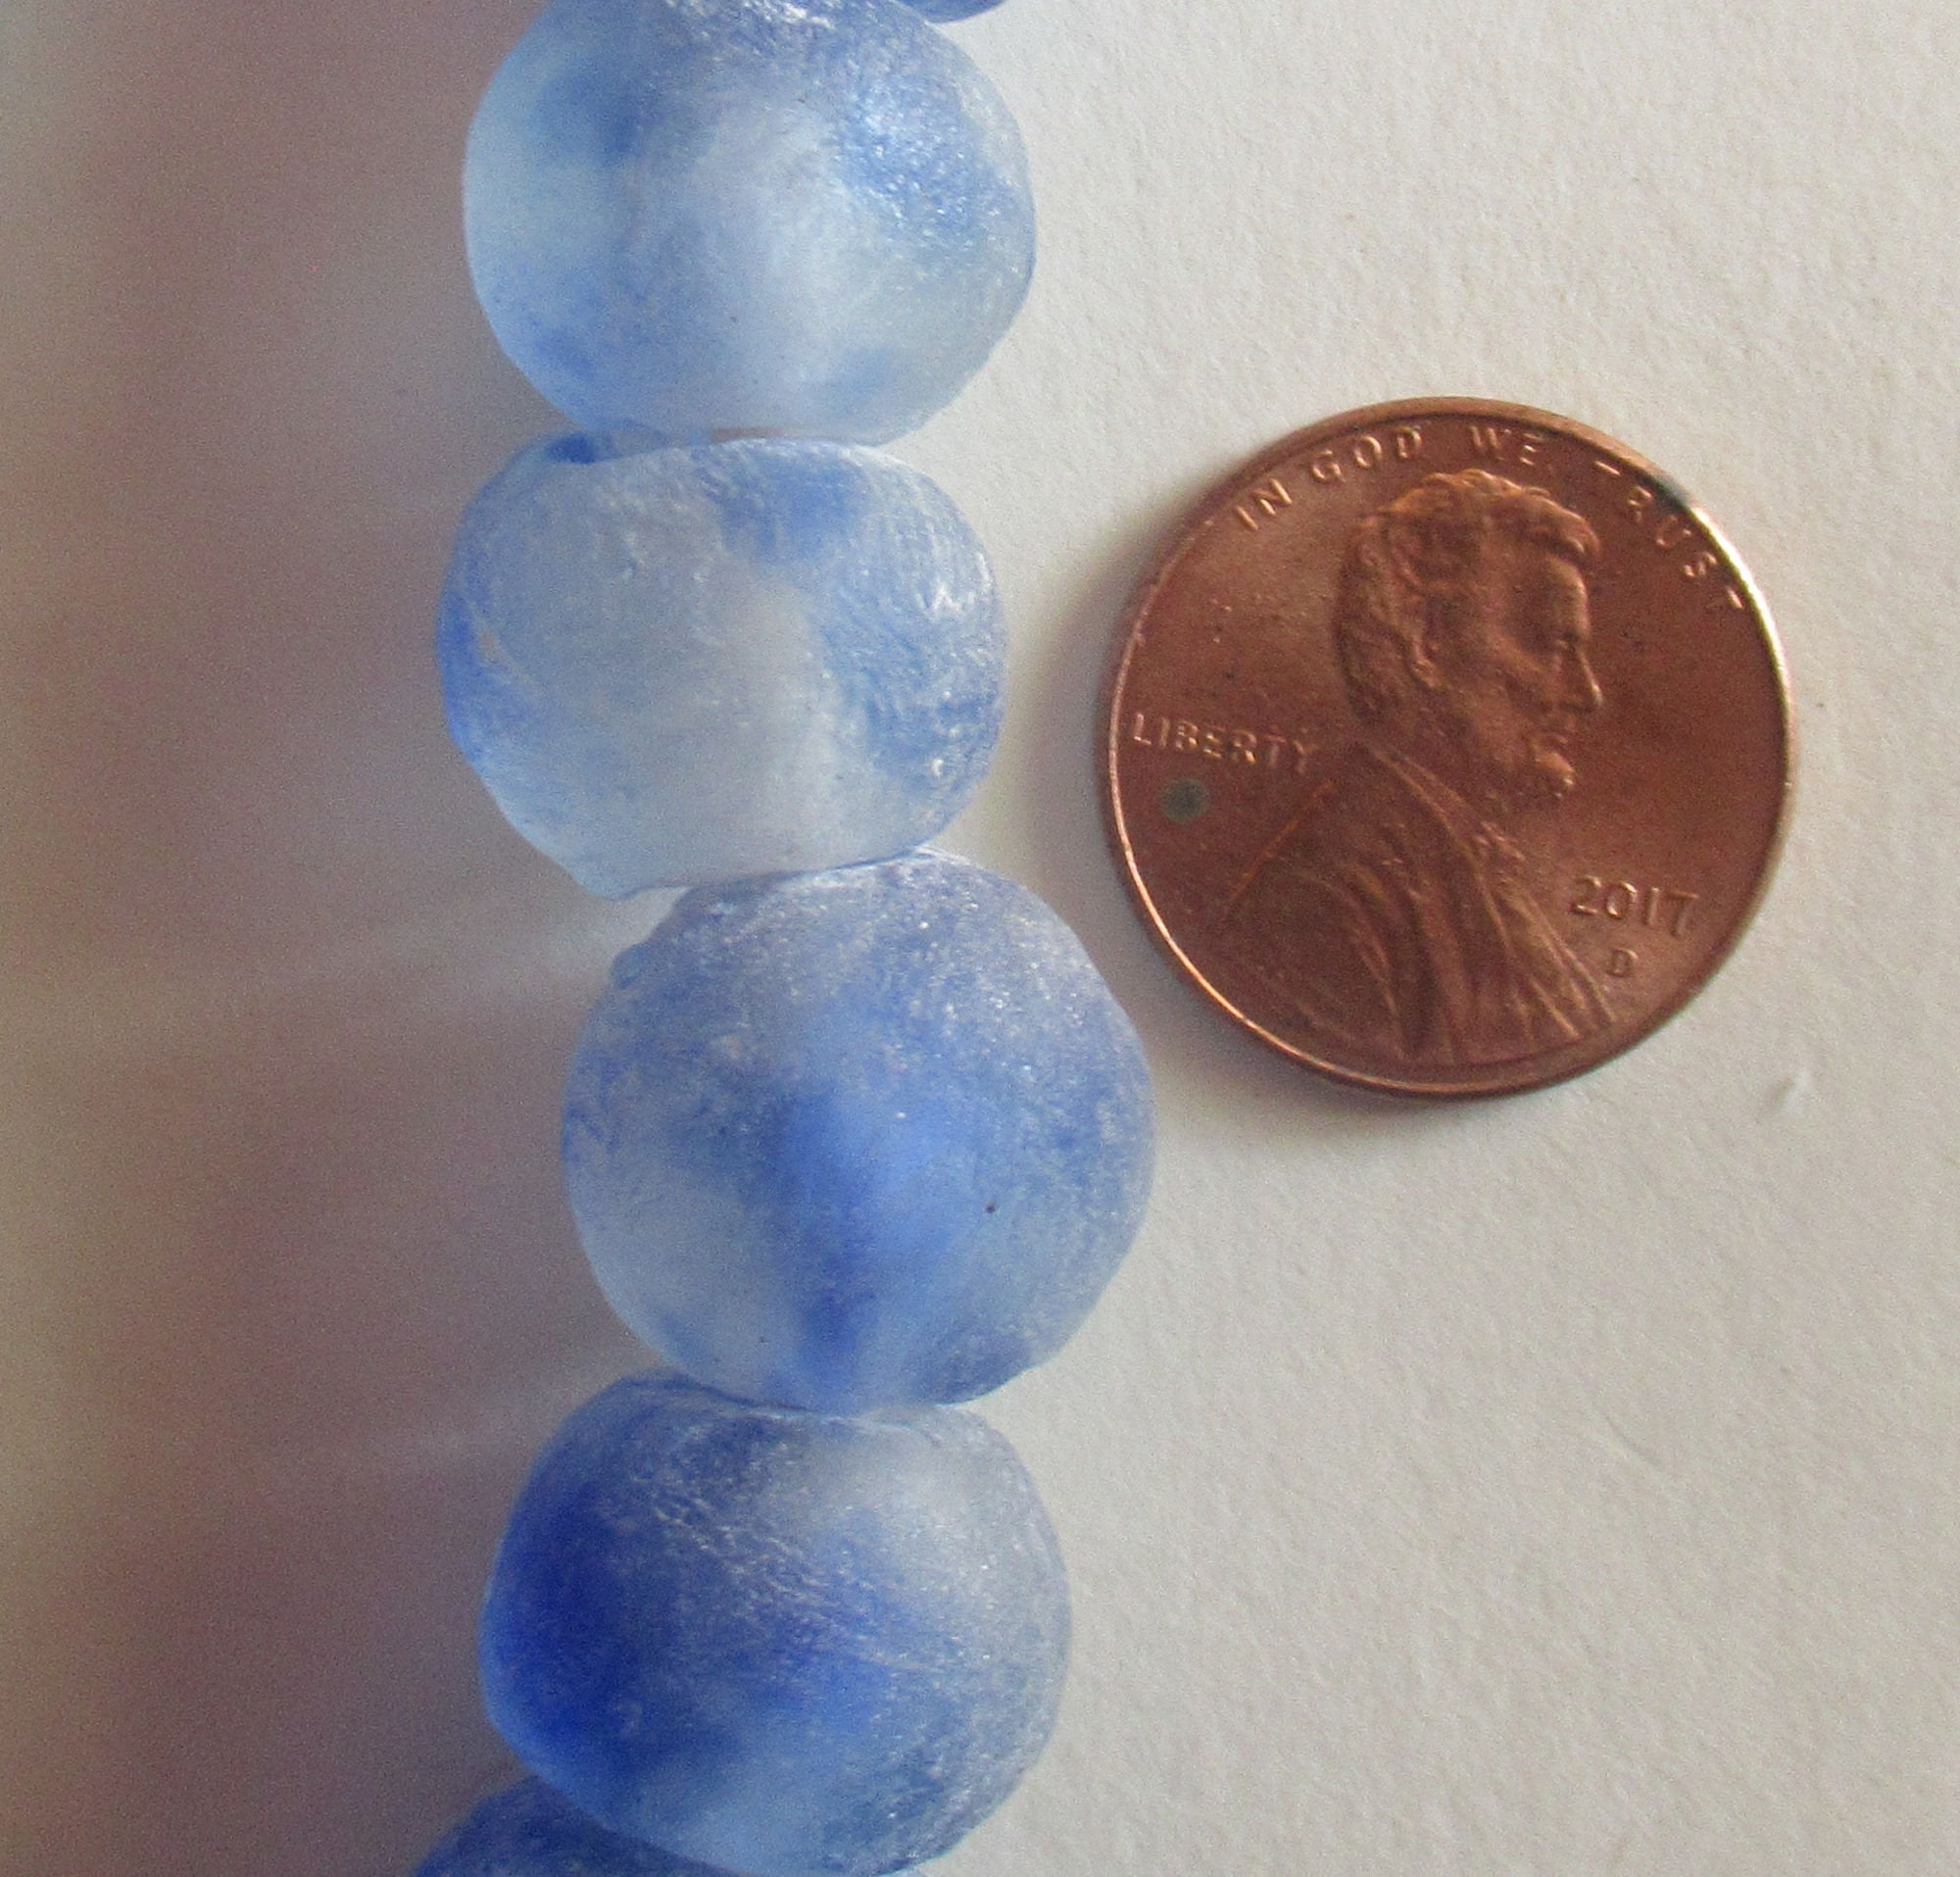 18mm round crackle glass cabochons, blue